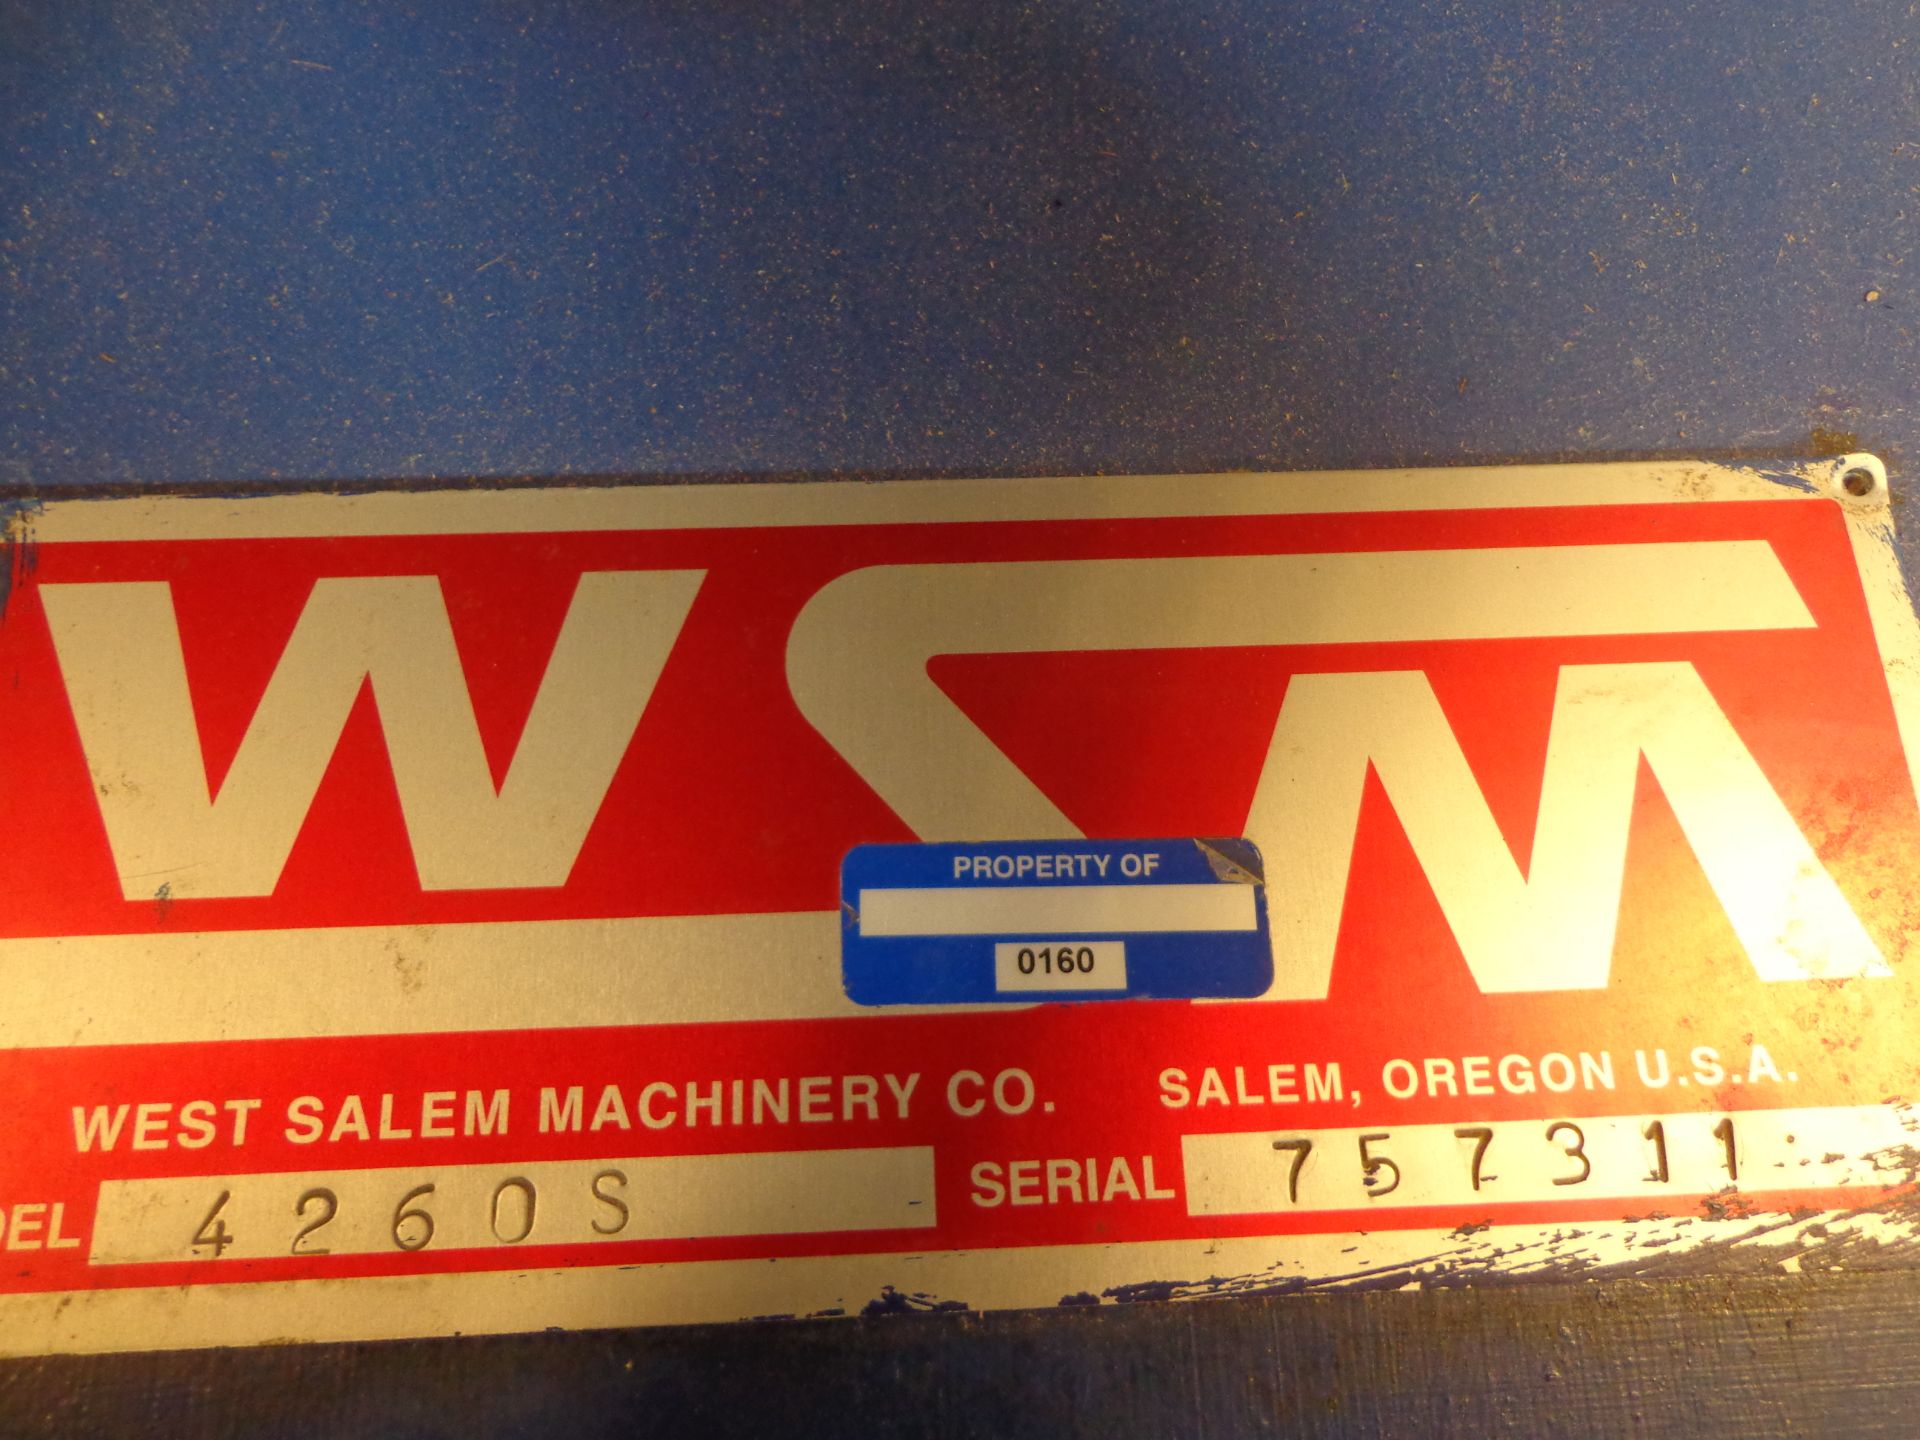 WEST SALEM MACHINERY 42 SERIES HAMMERMILL GRINDER, MDL.  4260S, SN. 757311. 27" X 63" OPENING, 42" - Image 5 of 9